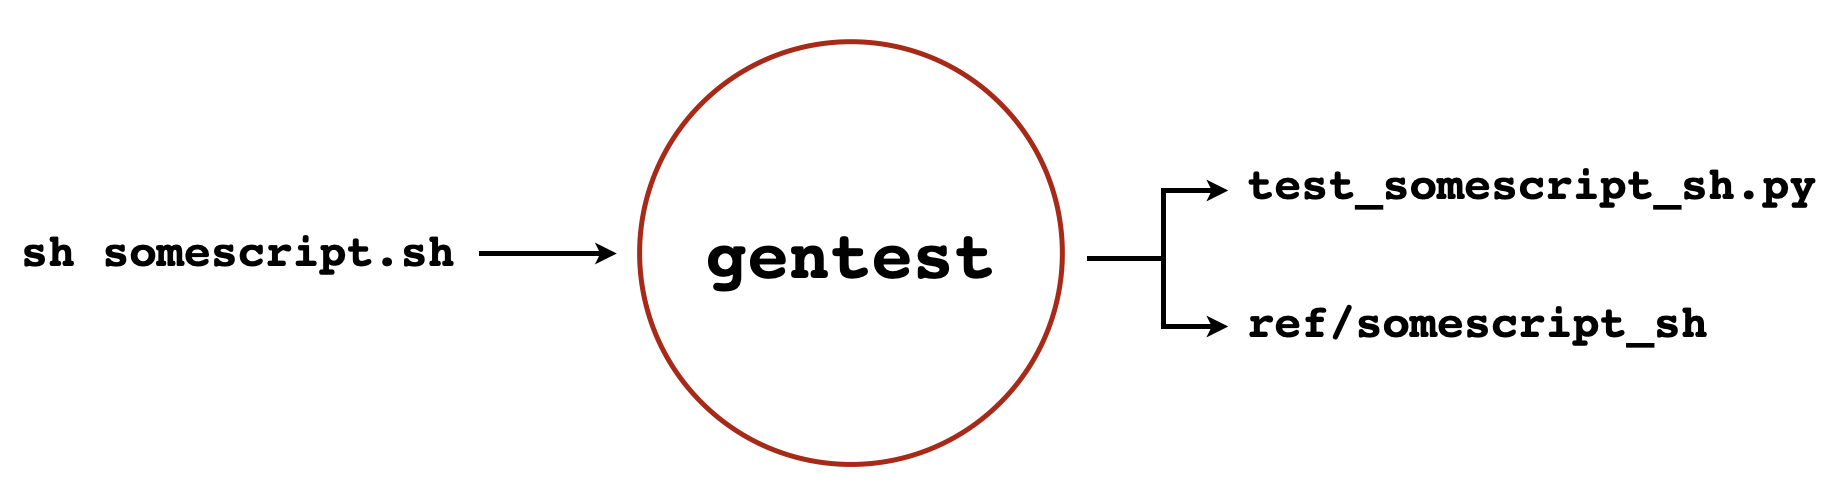 gentest takes some_script.sh as input and generates test_somescript_sh.py and ref_somescript_sh as outputs